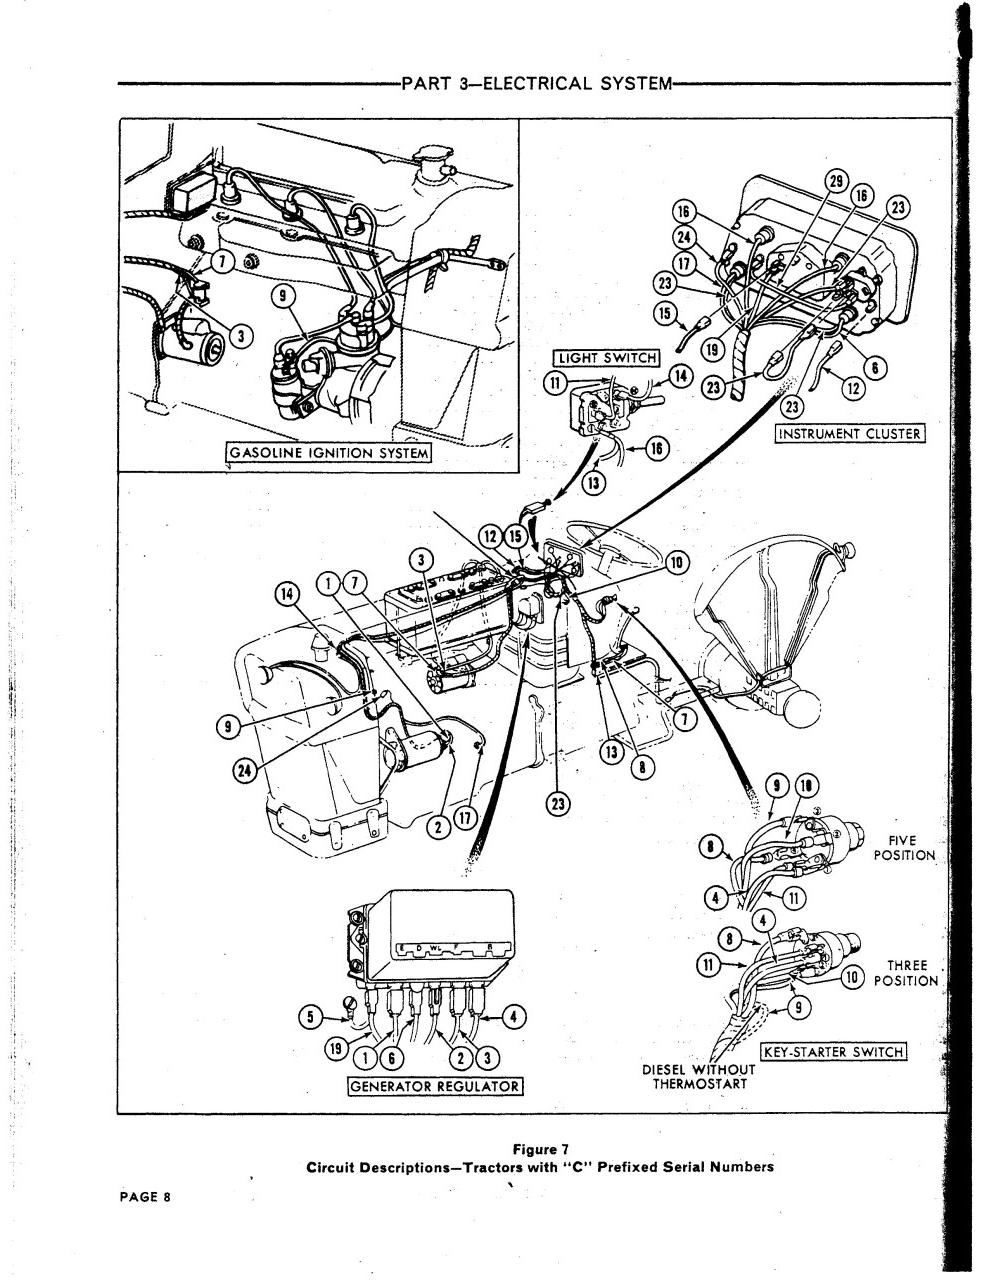 Diagram] 1973 Ford 2000 Tractor Wiring Diagram Full Version